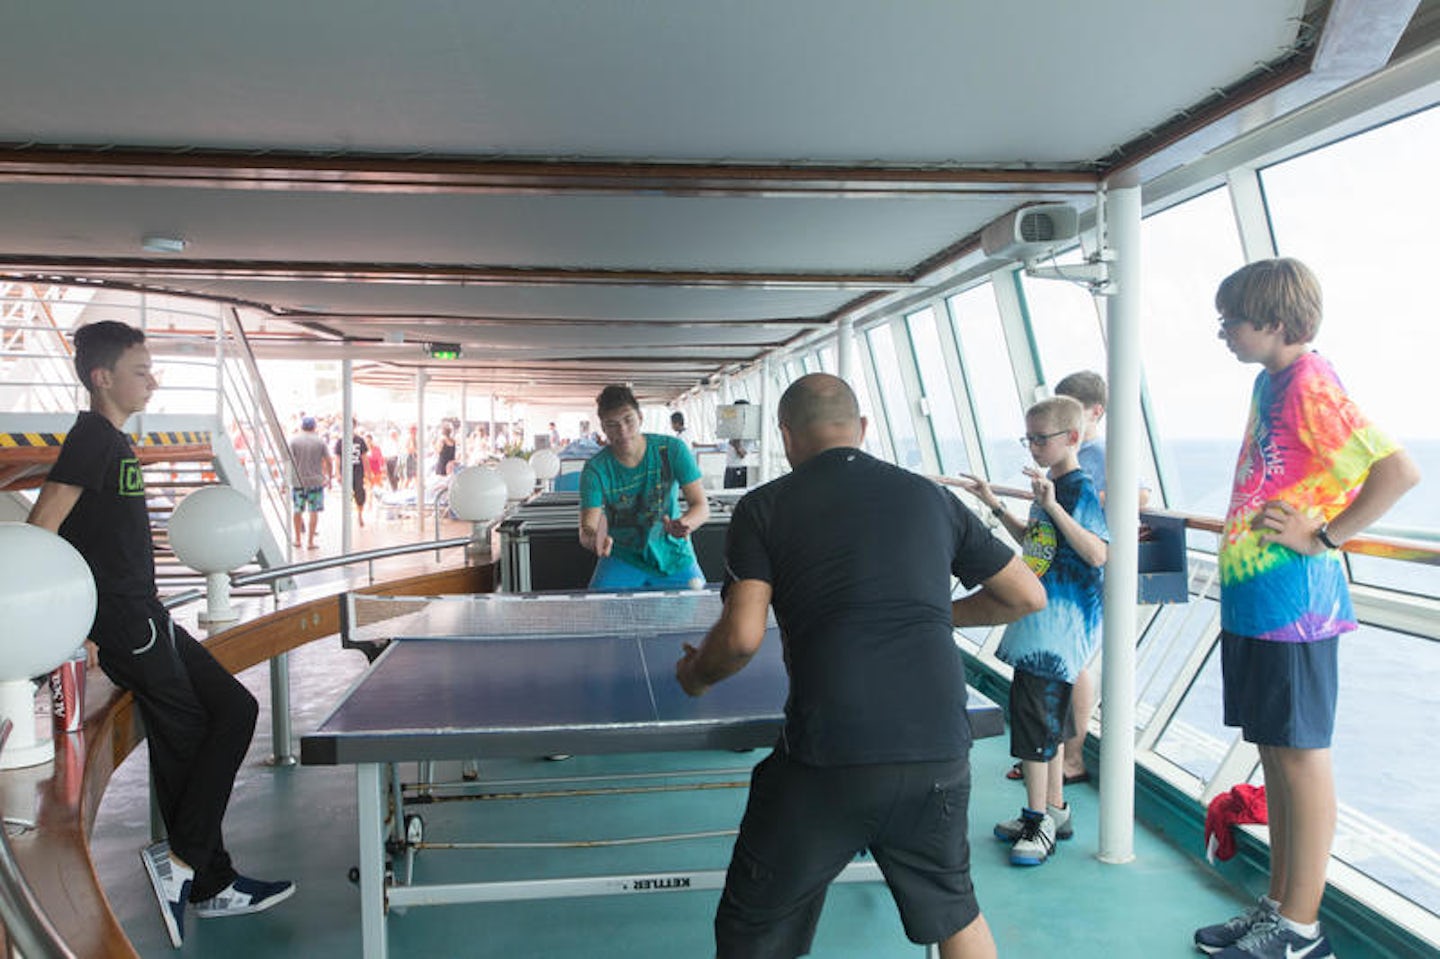 Sport Areas on Enchantment of the Seas